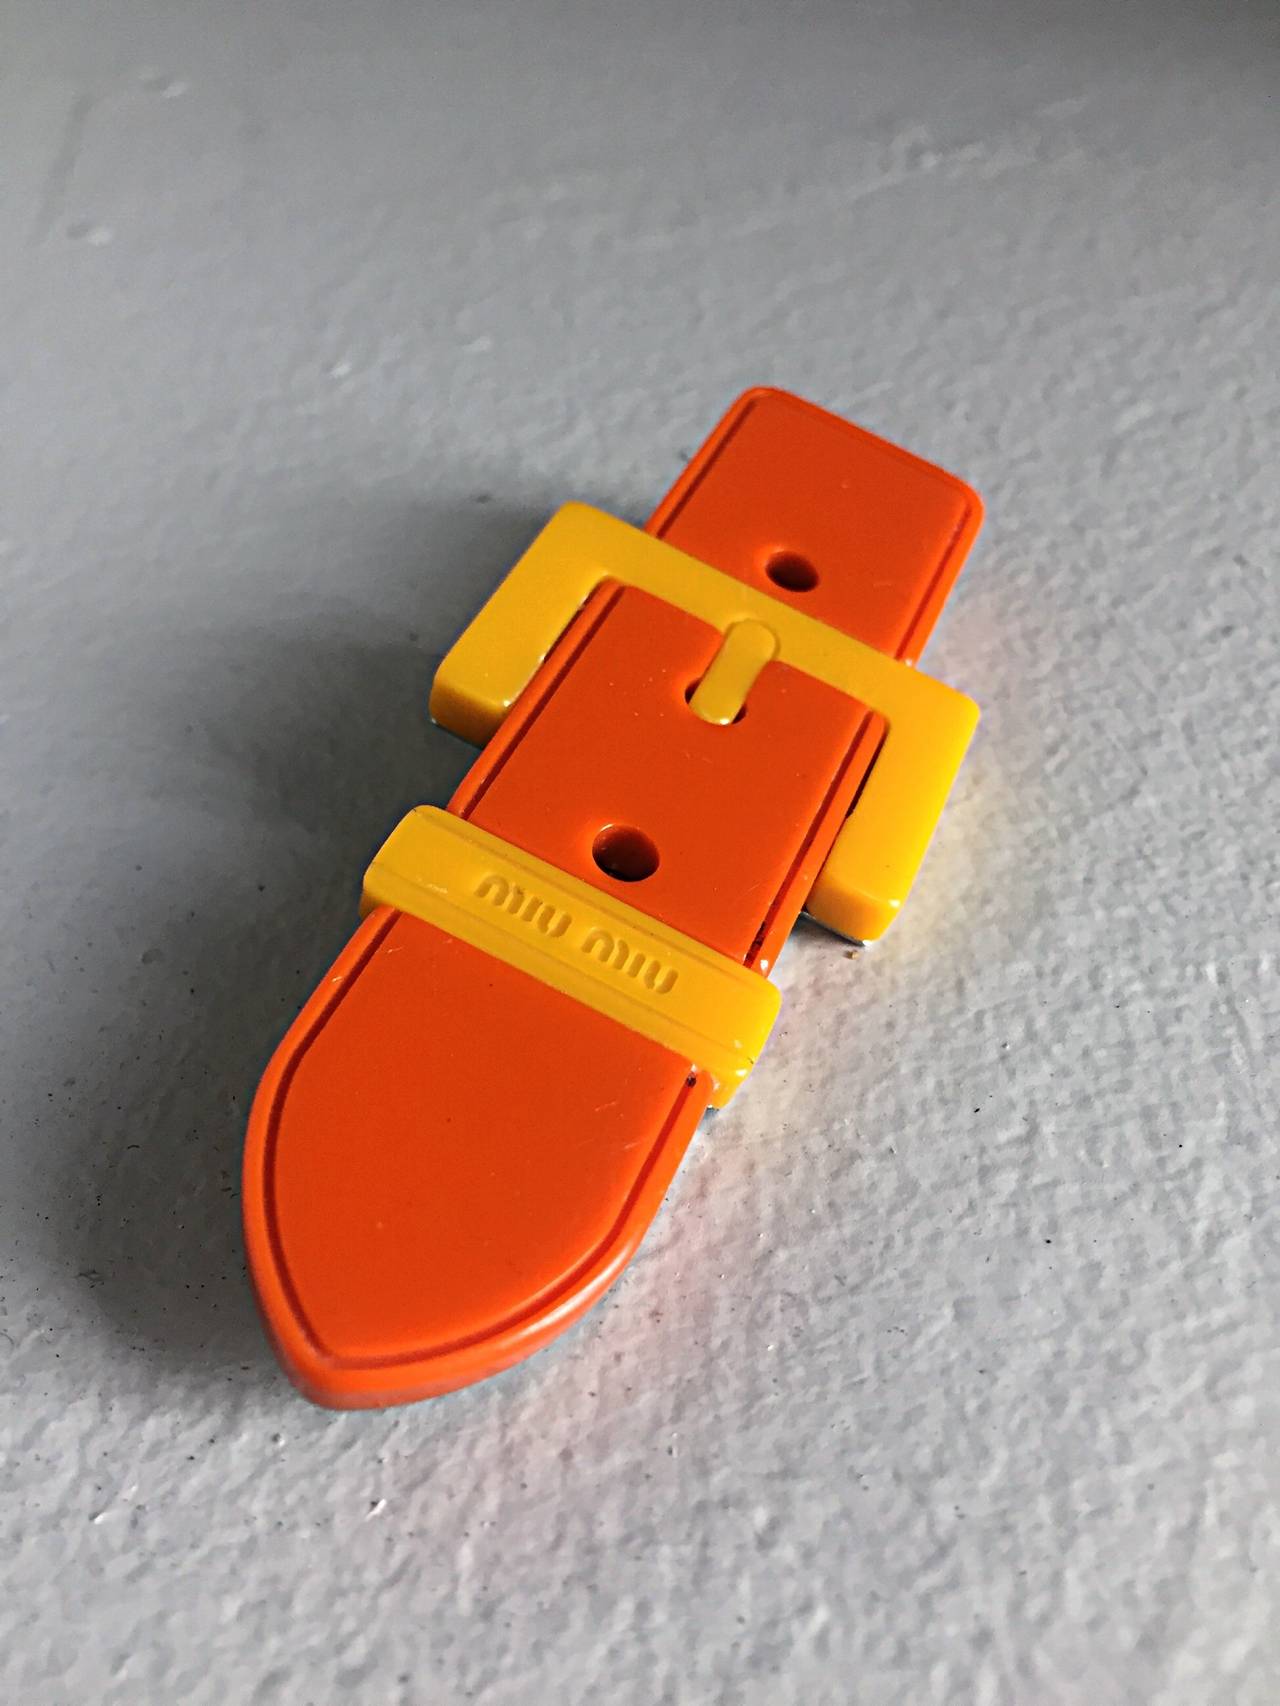 Awesome Miu Miu buckle brooch! Vibrant orange and yellow, this pin goes with everything! So many uses....perfect as a brooch on your favorite suit or sweater--Looks great used as the closure to a cardigan/jacket. Also, a great accessory for any bag!